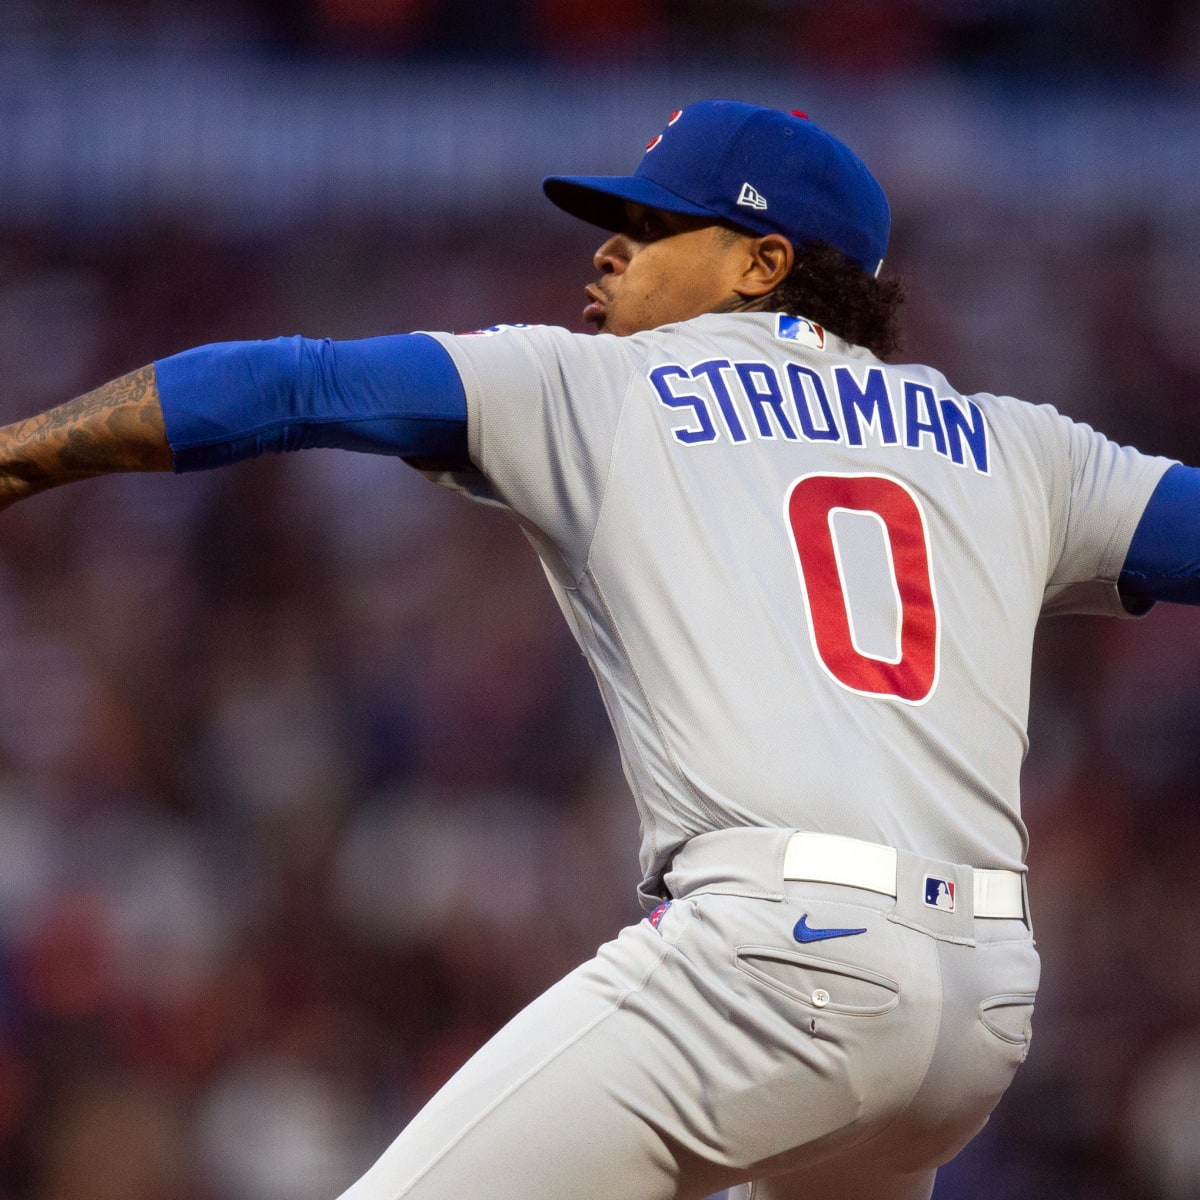 Column: The Chicago Cubs held a sell-off at the trade deadline while the  St. Louis Cardinals were buyers. What if the North Siders went the way of  their archrivals?